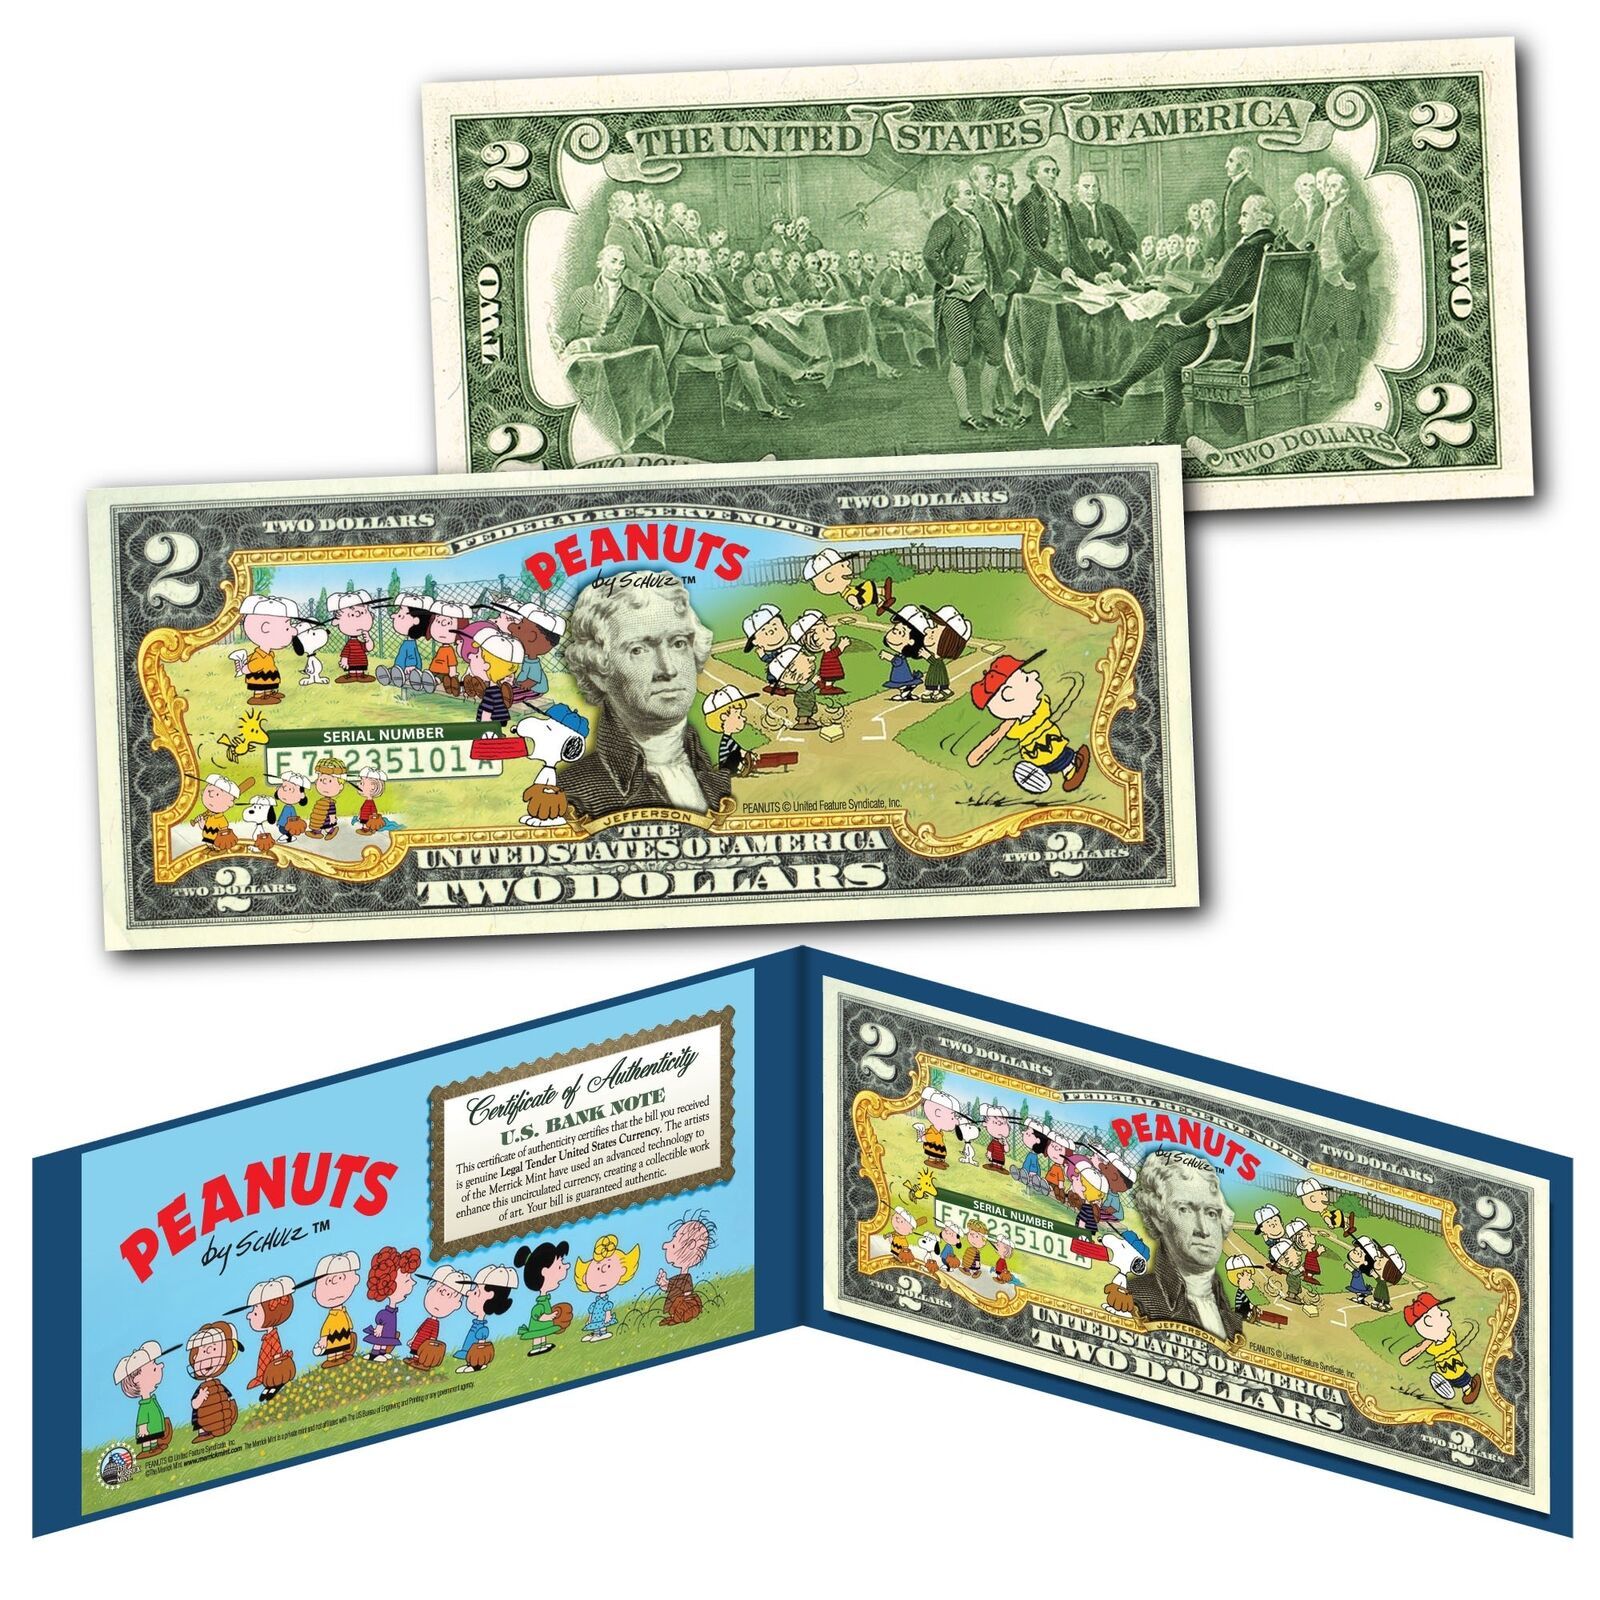 Primary image for PEANUTS Charlie Brown BASEBALL Officially Licensed Genuine Legal Tender $2 Bill